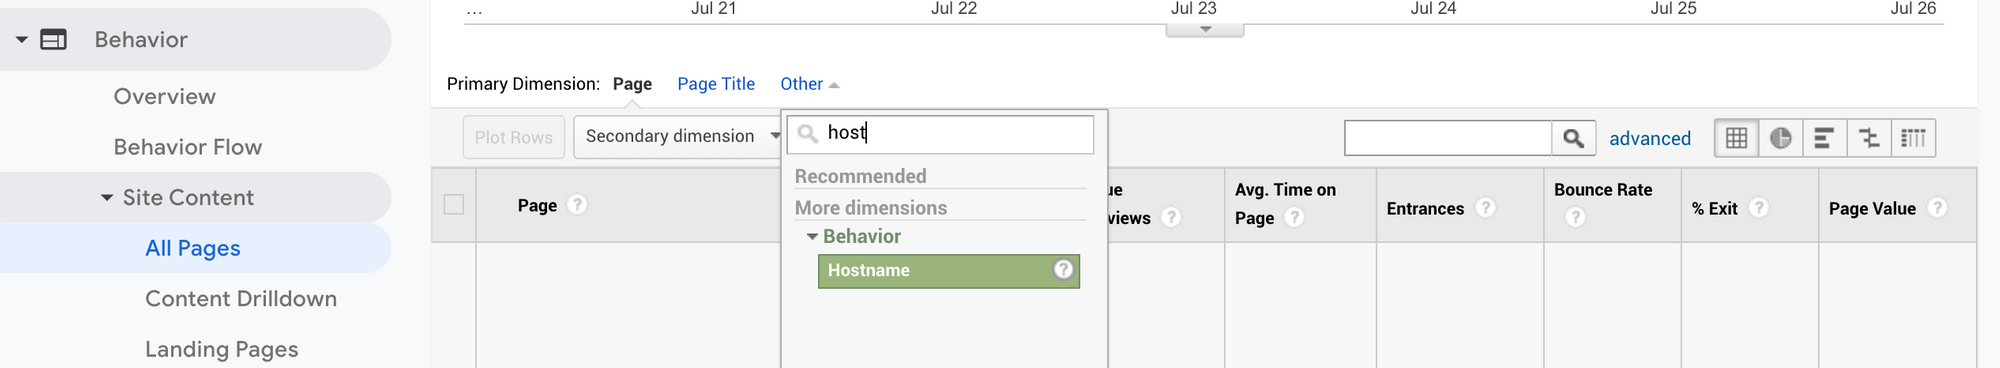 Setting "Hostname" as the primary dimension on the Add Pages view